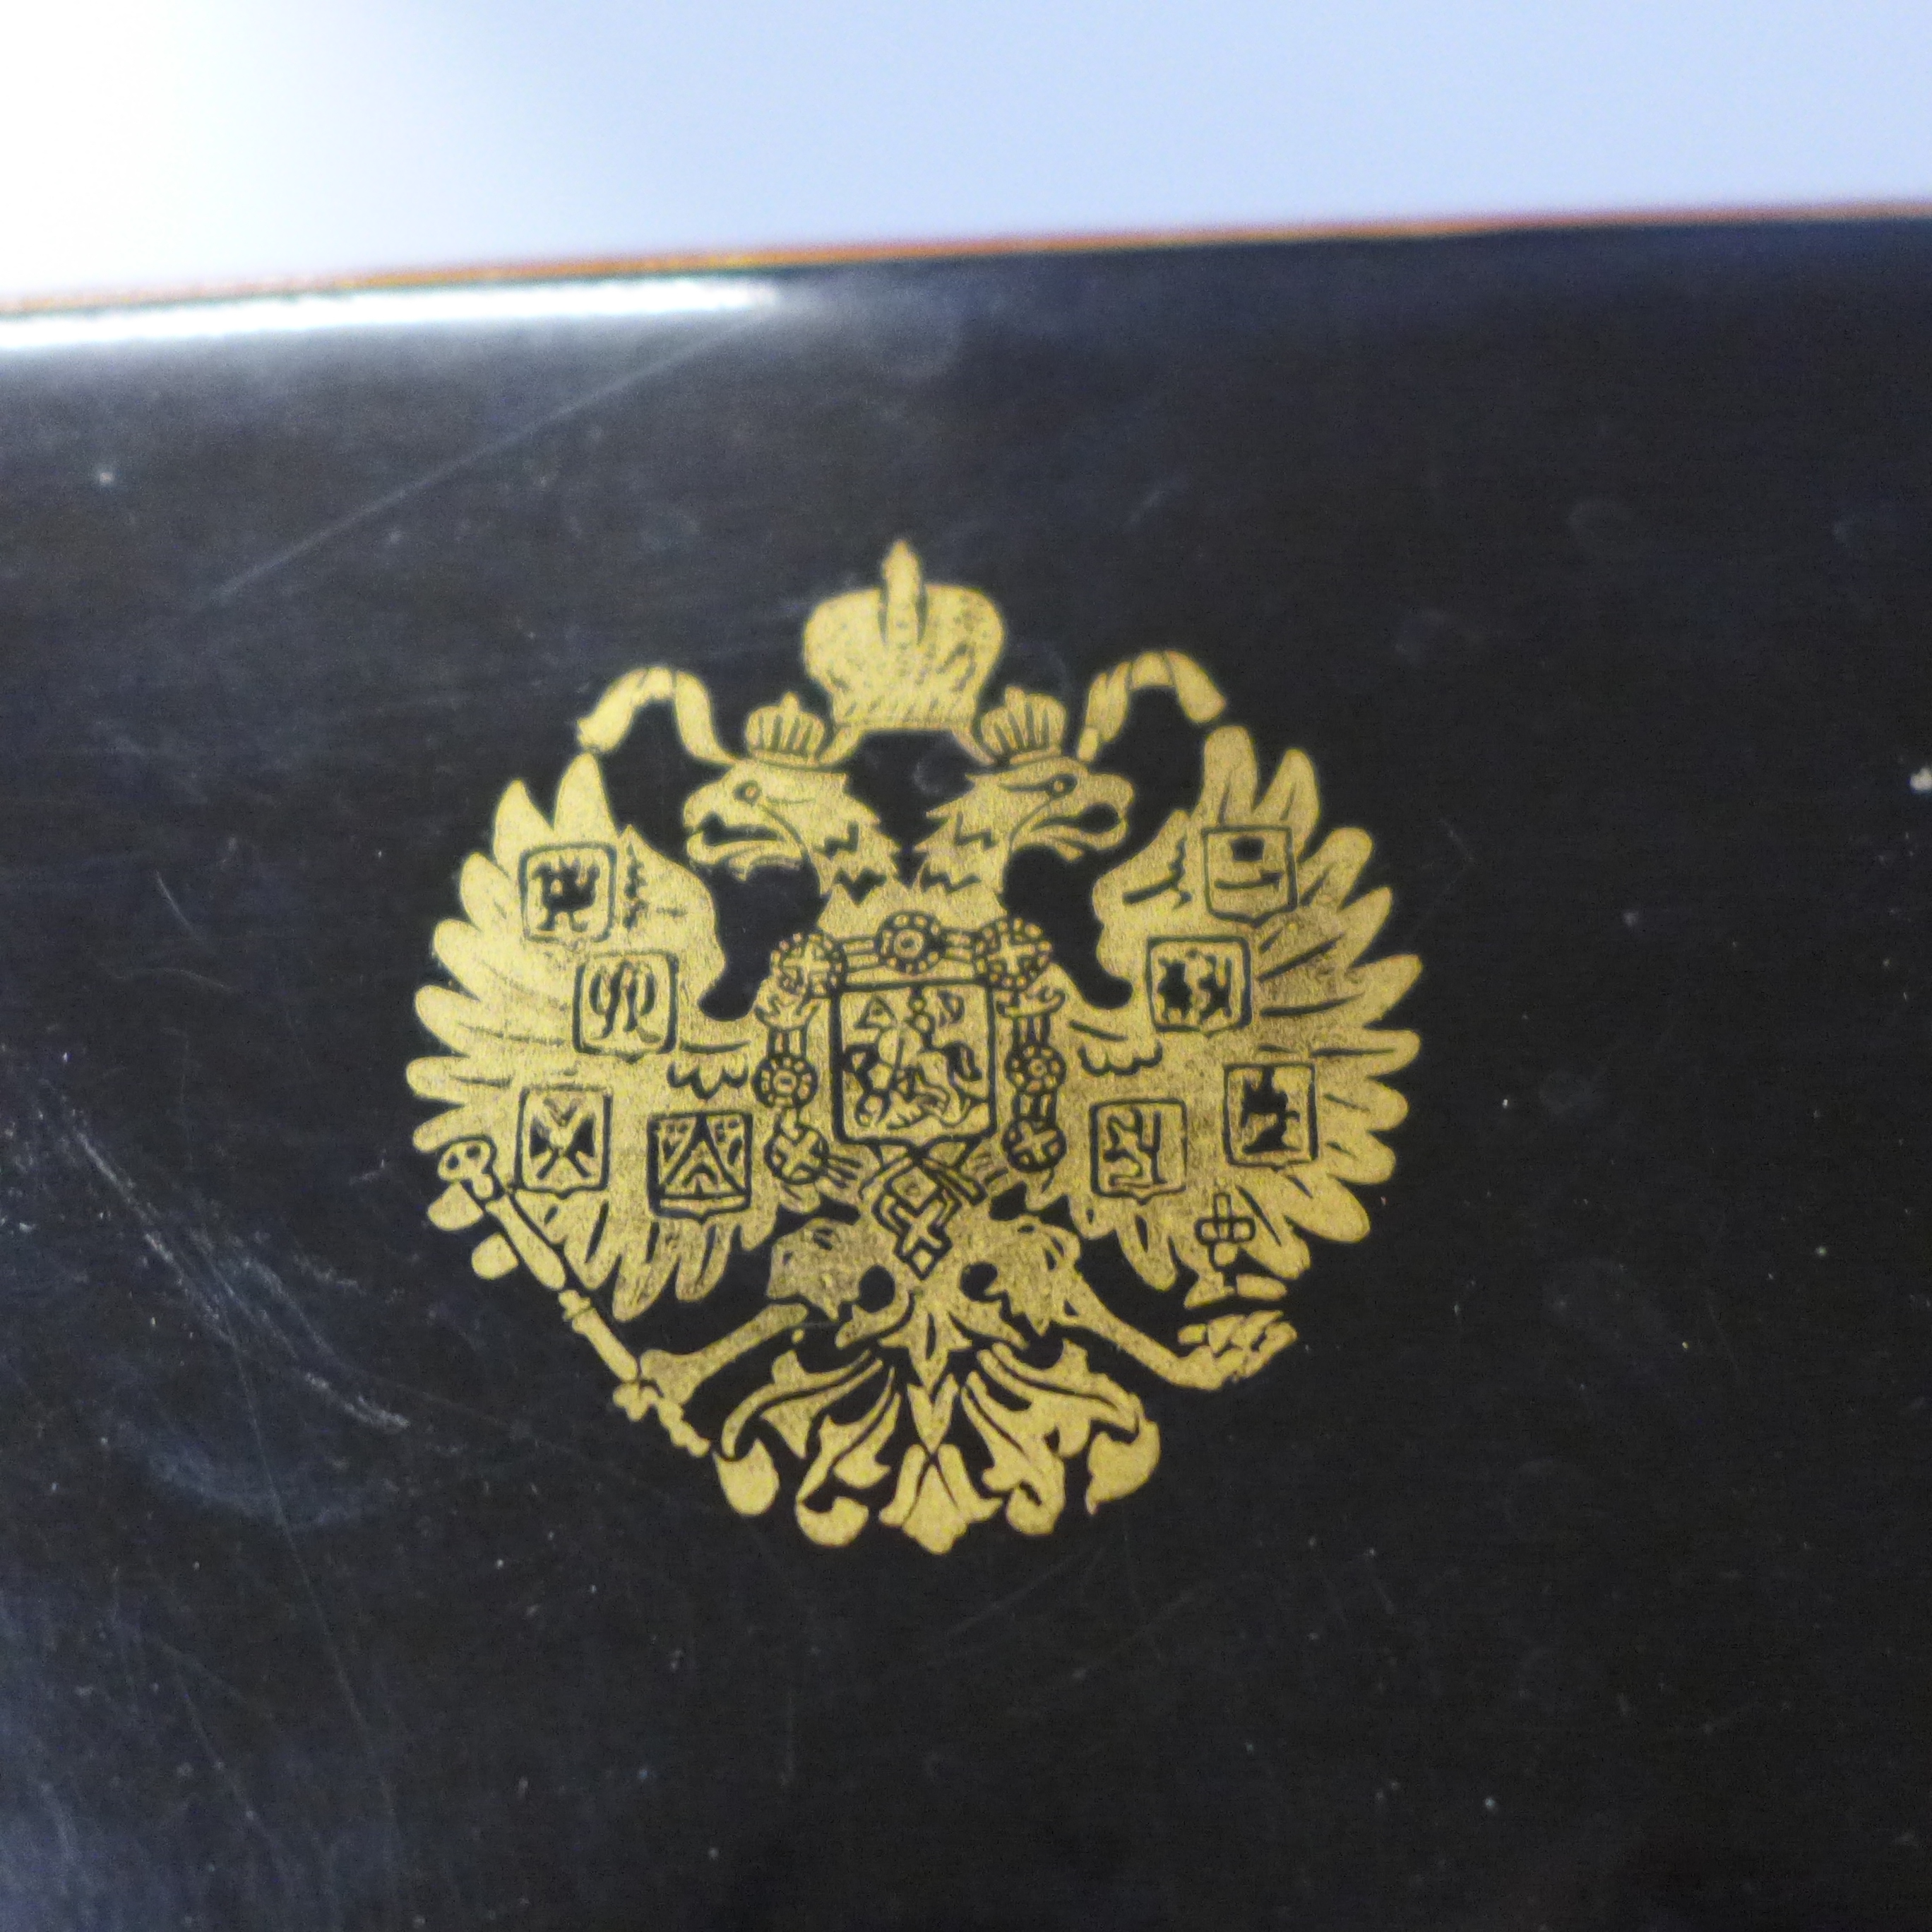 A lacquered wooden box with Imperial Russian emblem on lid, a/f - Image 3 of 3